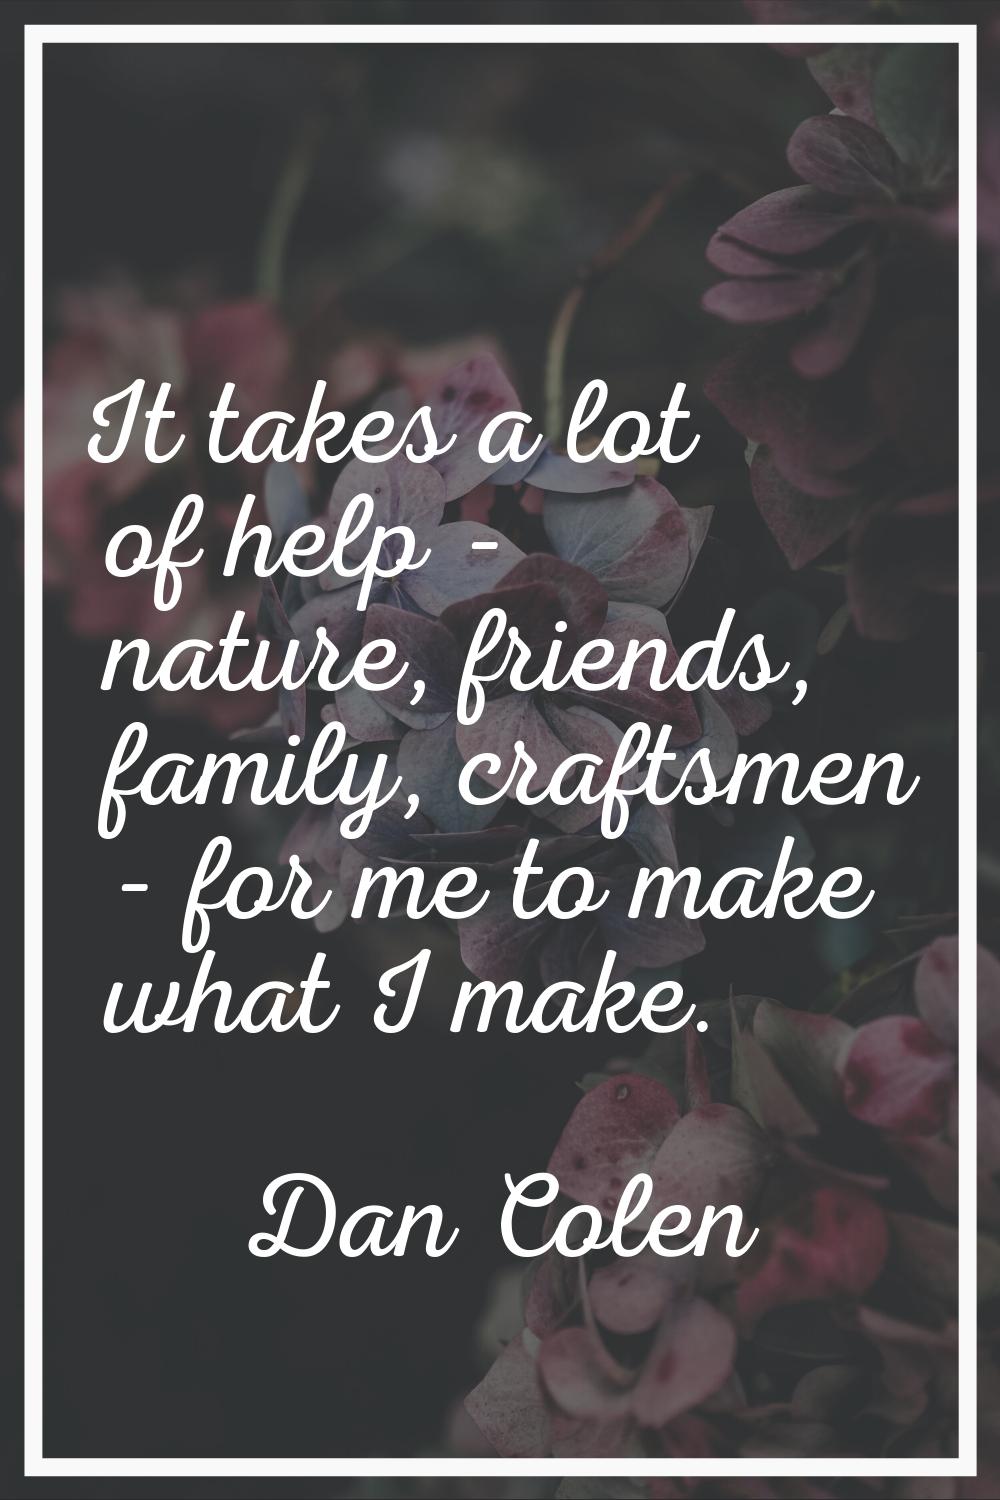 It takes a lot of help - nature, friends, family, craftsmen - for me to make what I make.